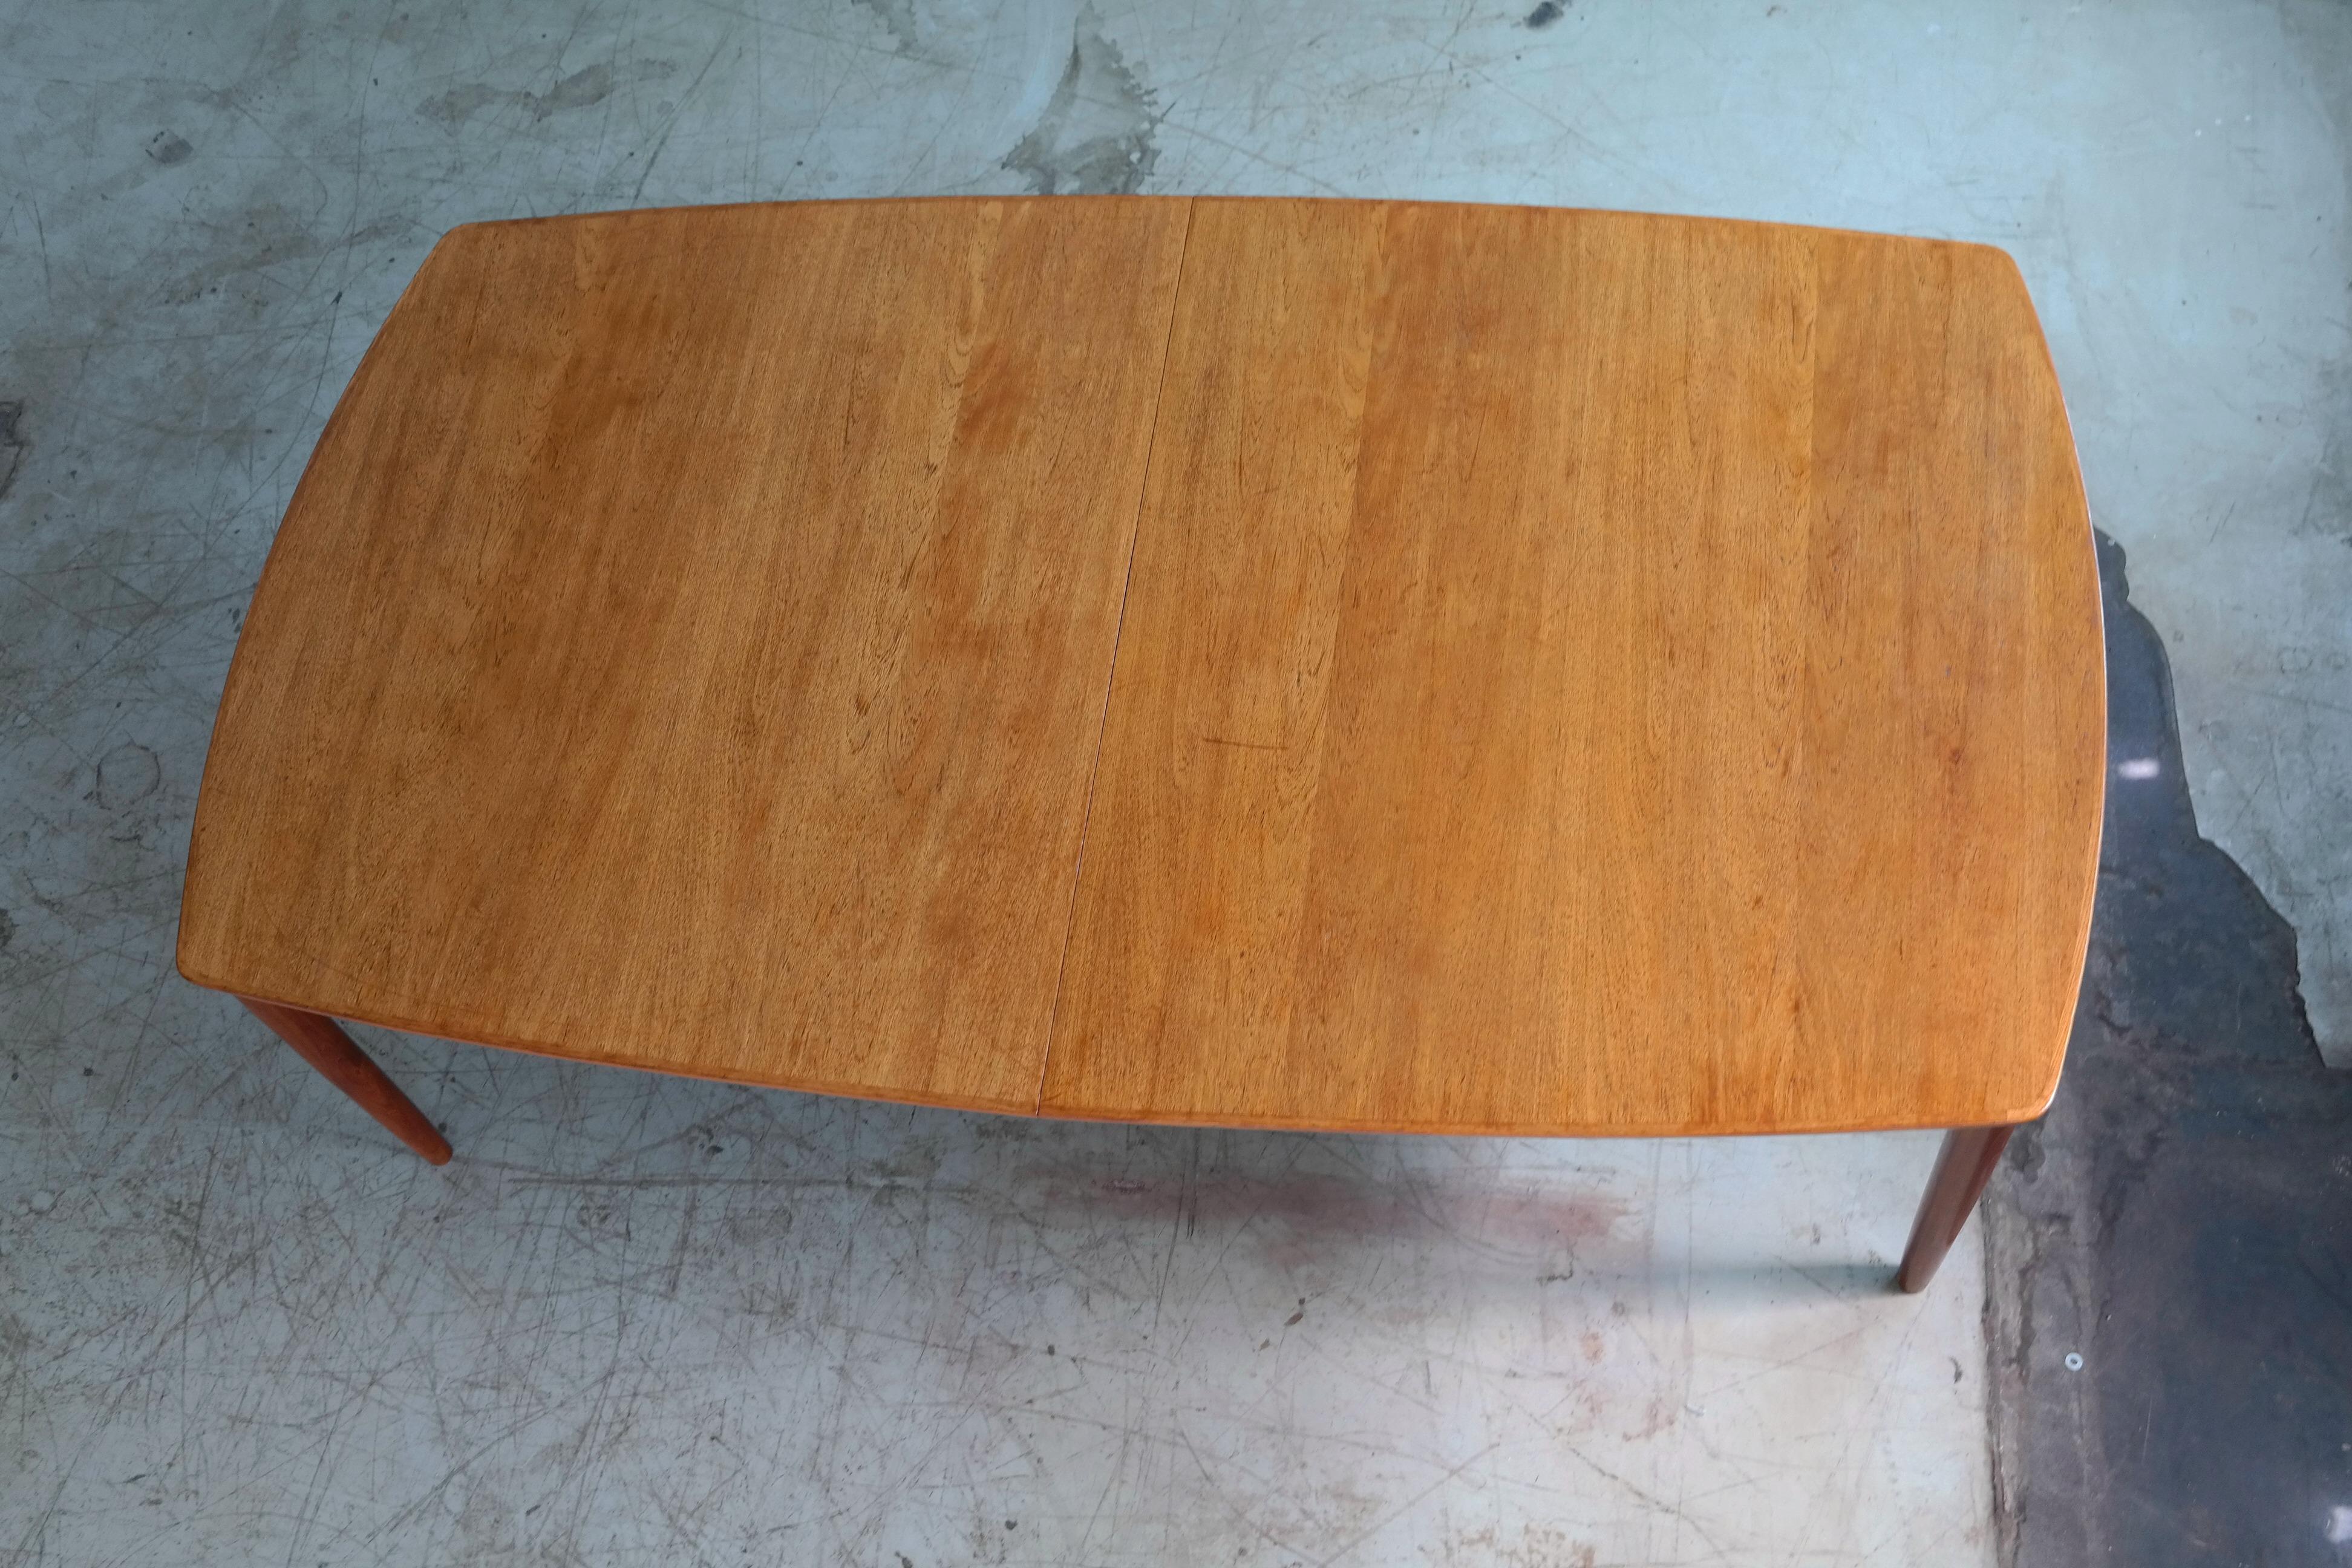 Rare to find Danish conference Table fro the late 1960s. Beautiful armrests and legs in carved elm wood with great grain and color. It has 8 matching chairs attributed Fritz Hansen that are sold separately. The chairs and matching conference table